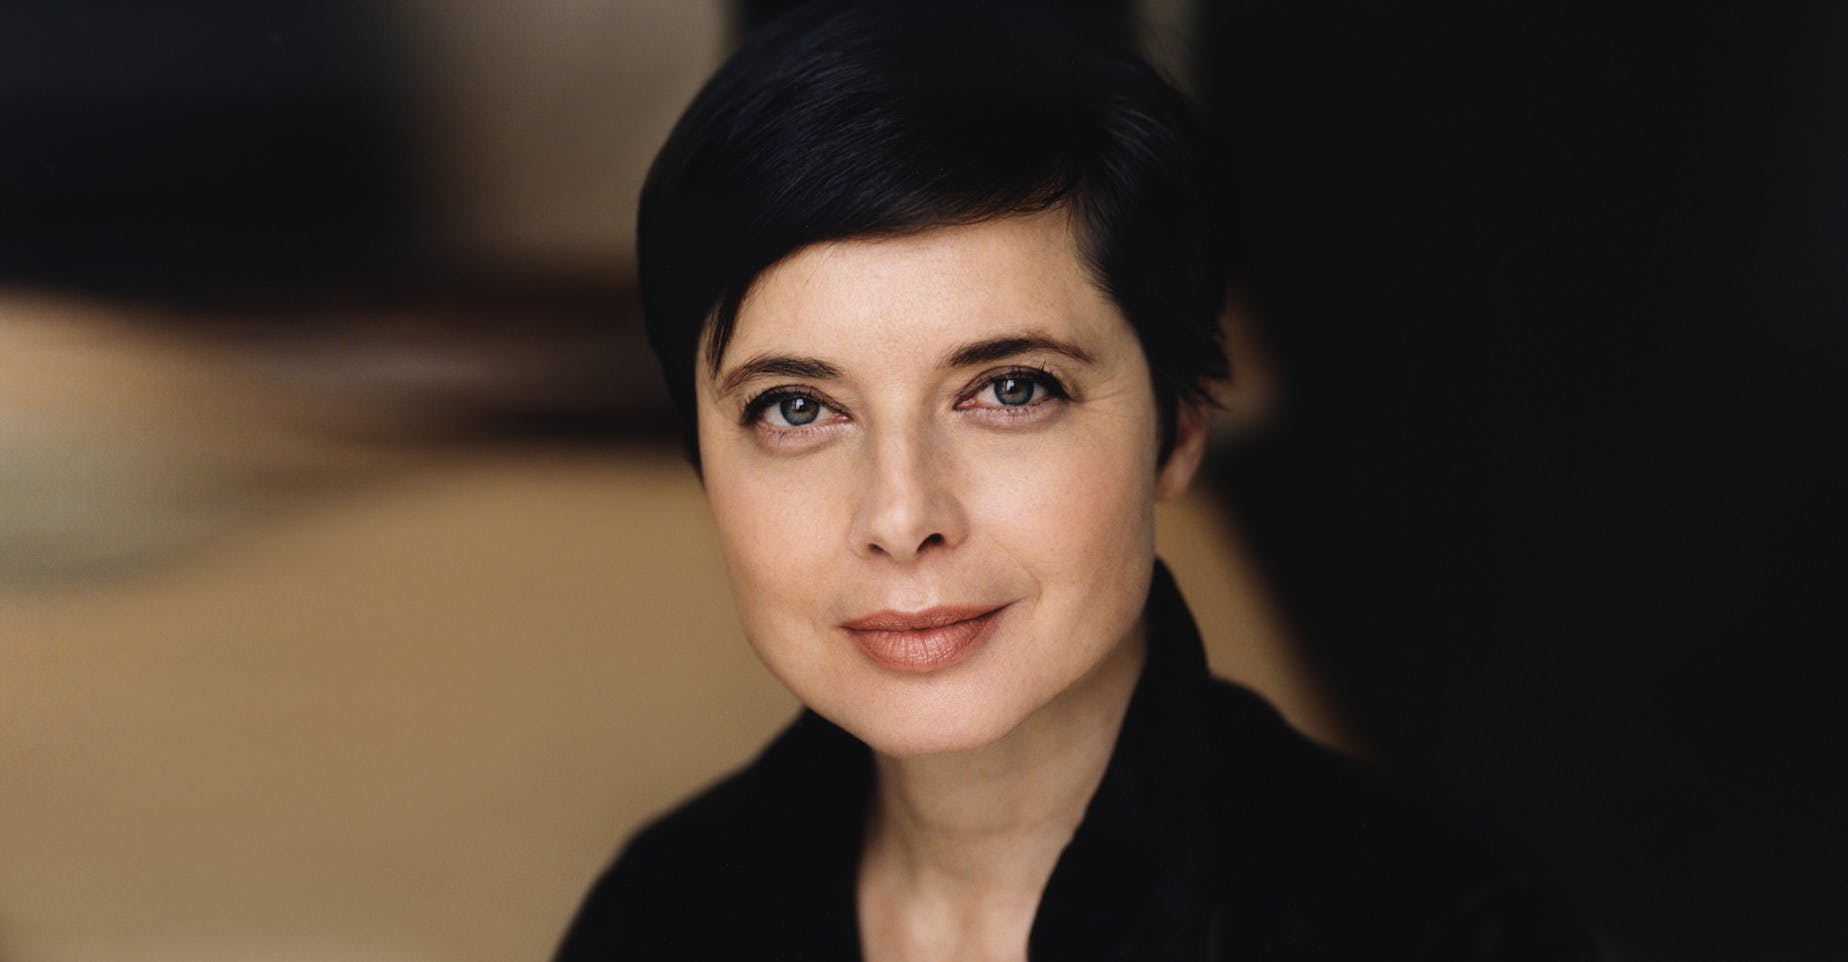 You Must Remember This - Isabella Rossellini in the 1990s media 1